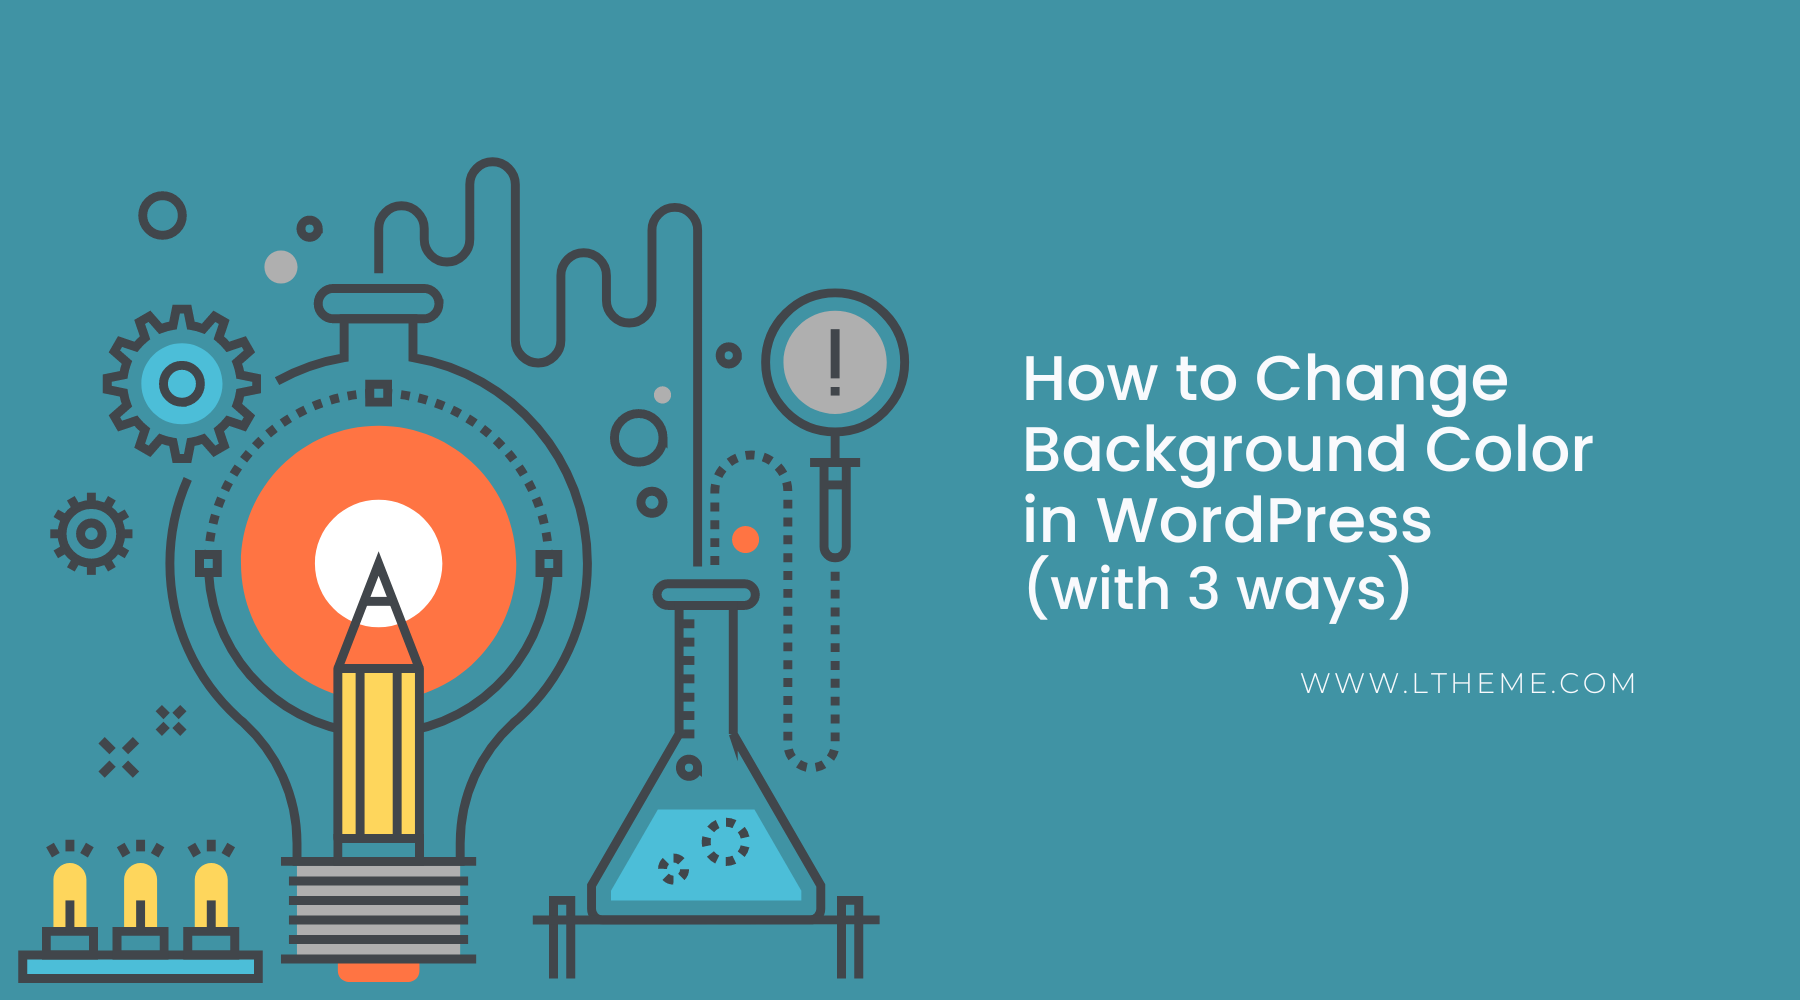 How to Change Background Color in WordPress (with 3 ways) 2023 - LTHEME